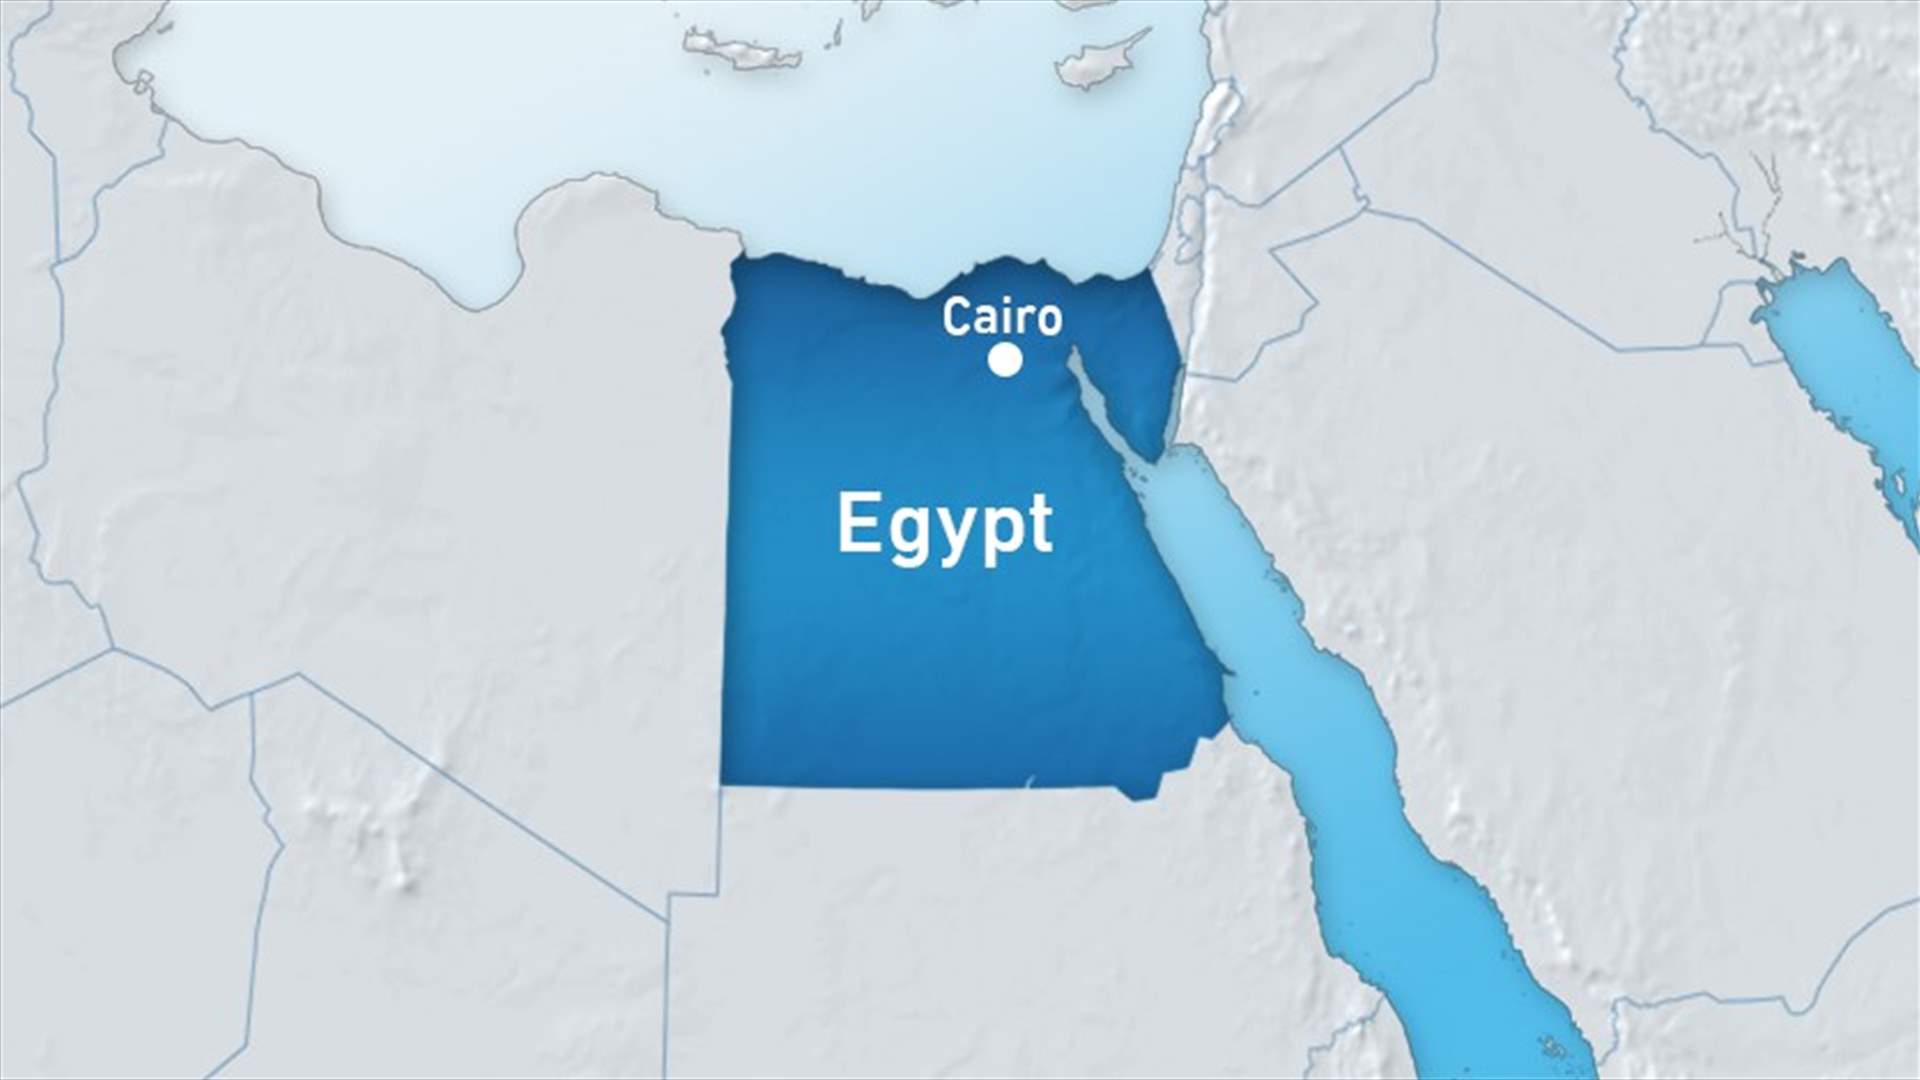 At least one killed in a Cairo blast, no claim of responsibility